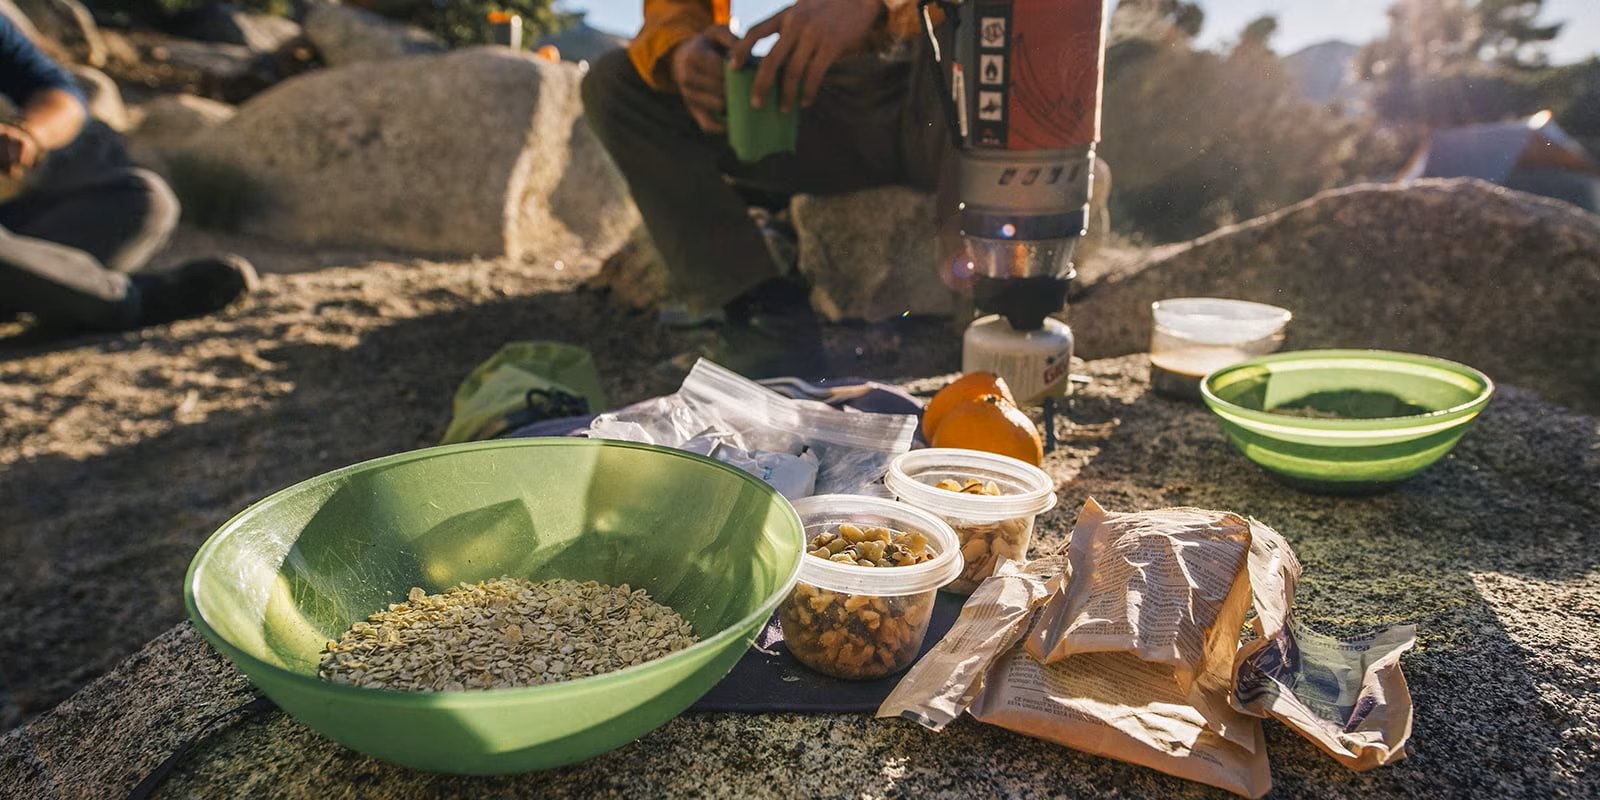 How To Store Food While Backpacking